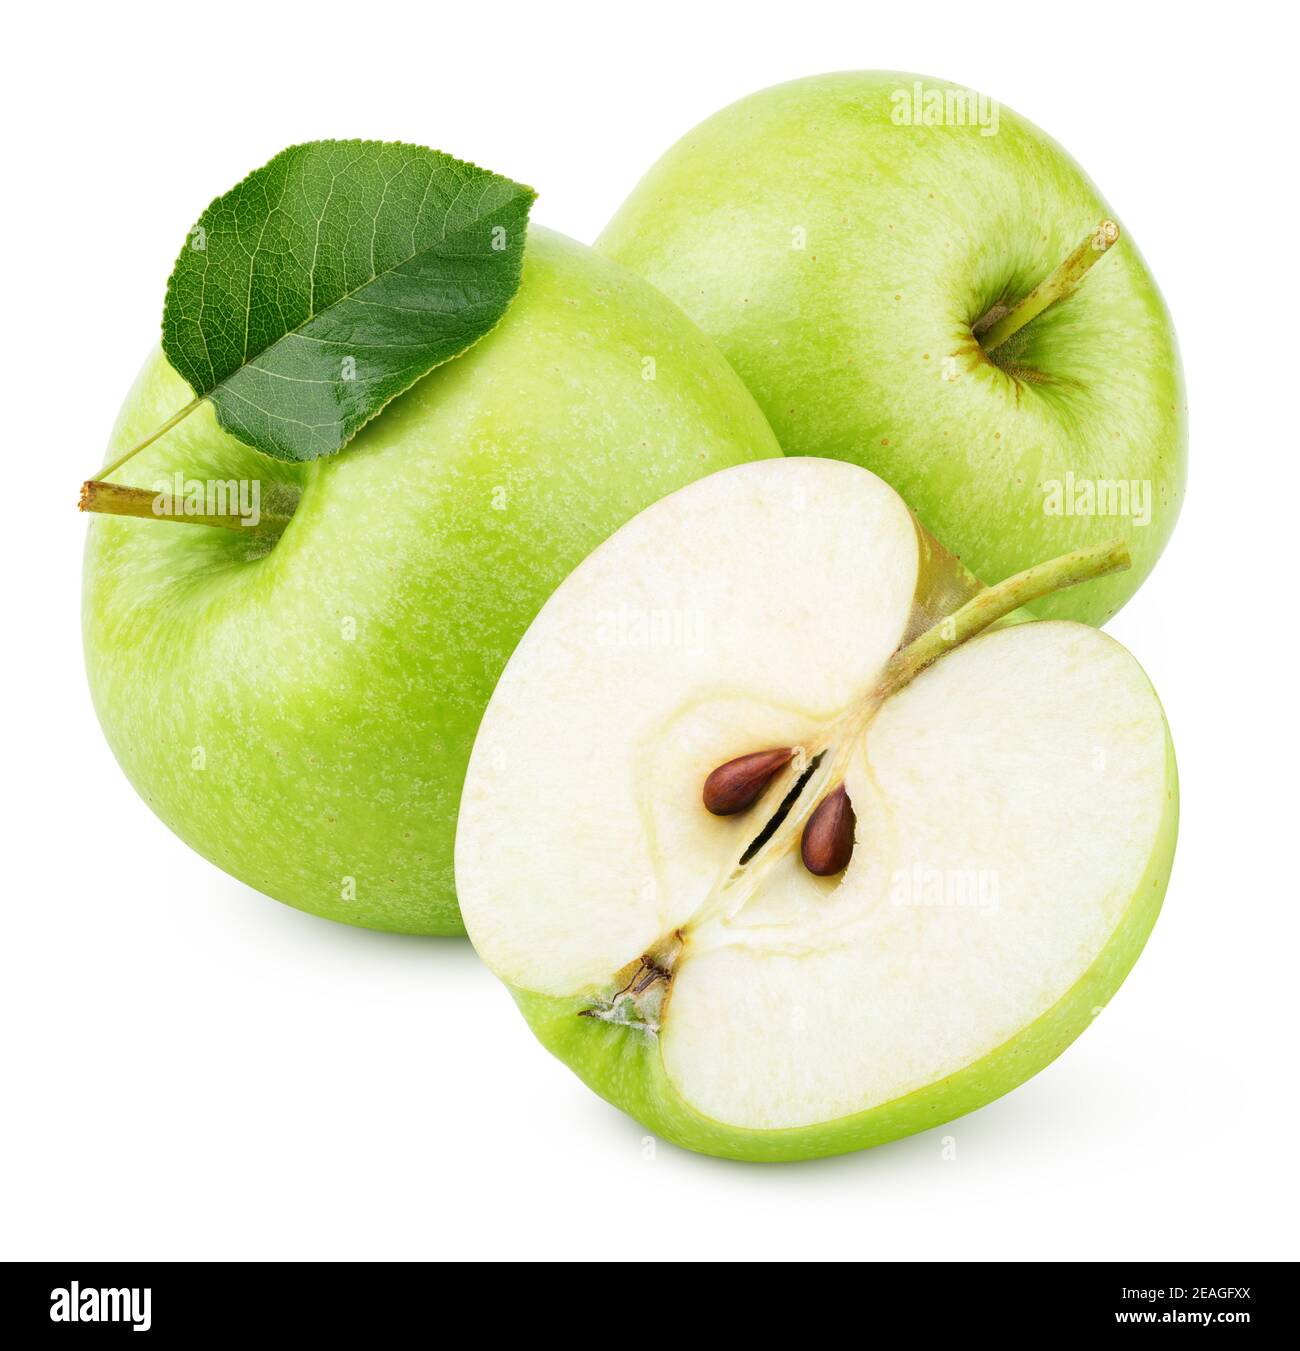 Group of ripe green apple fruits with apple half and green leaf isolated on white background. Apples with clipping path Stock Photo